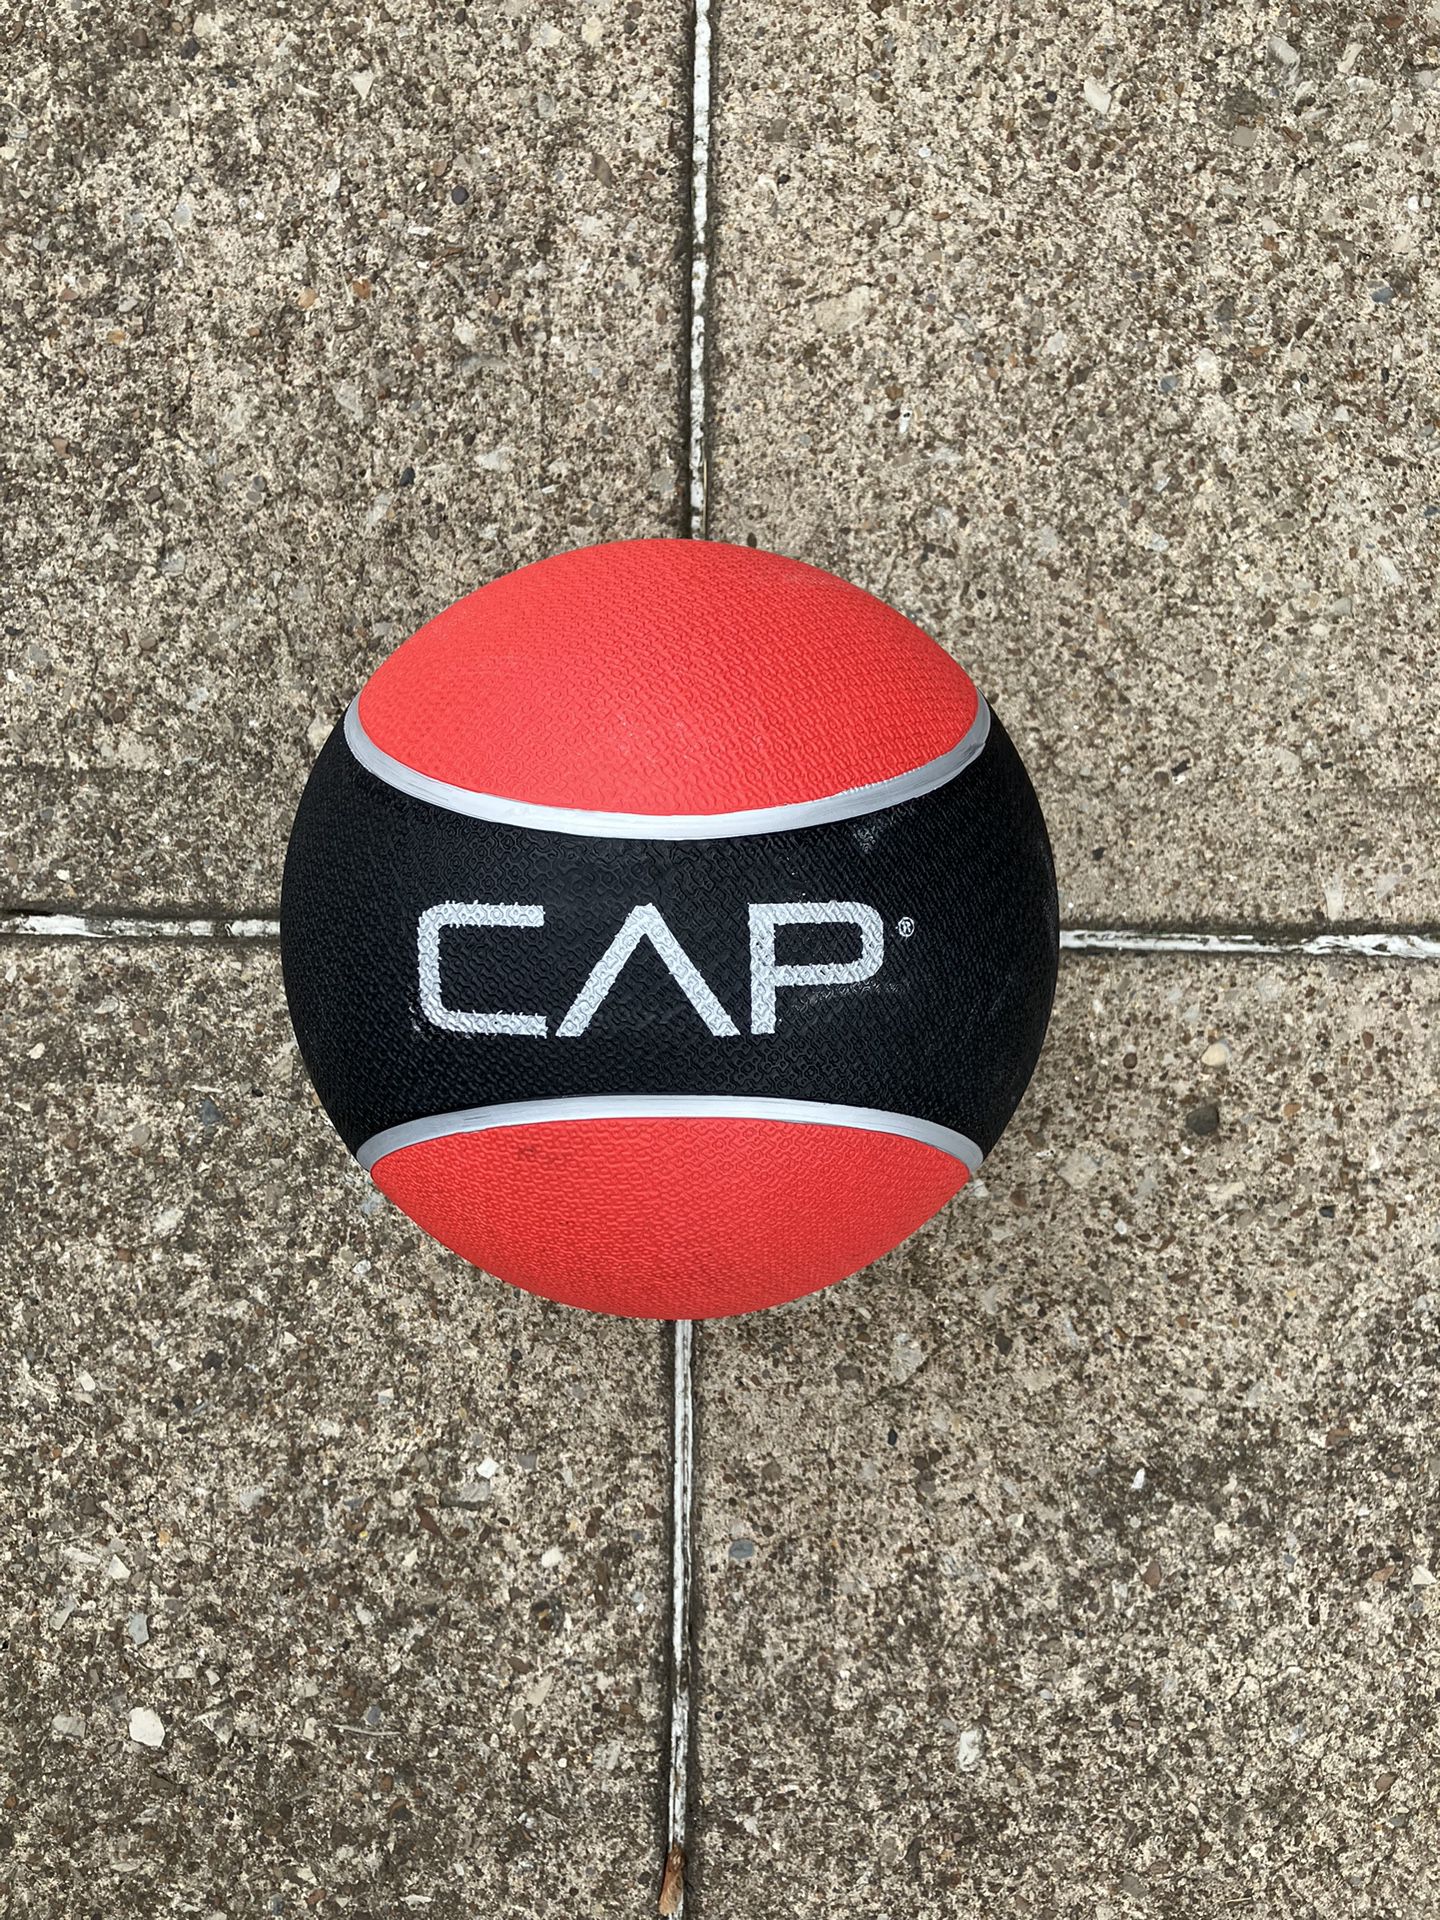 CAP Barbell Brand Rubber Medicine Ball 10lb 10 lb lbs 10lbs weight weighs exercise workout gym